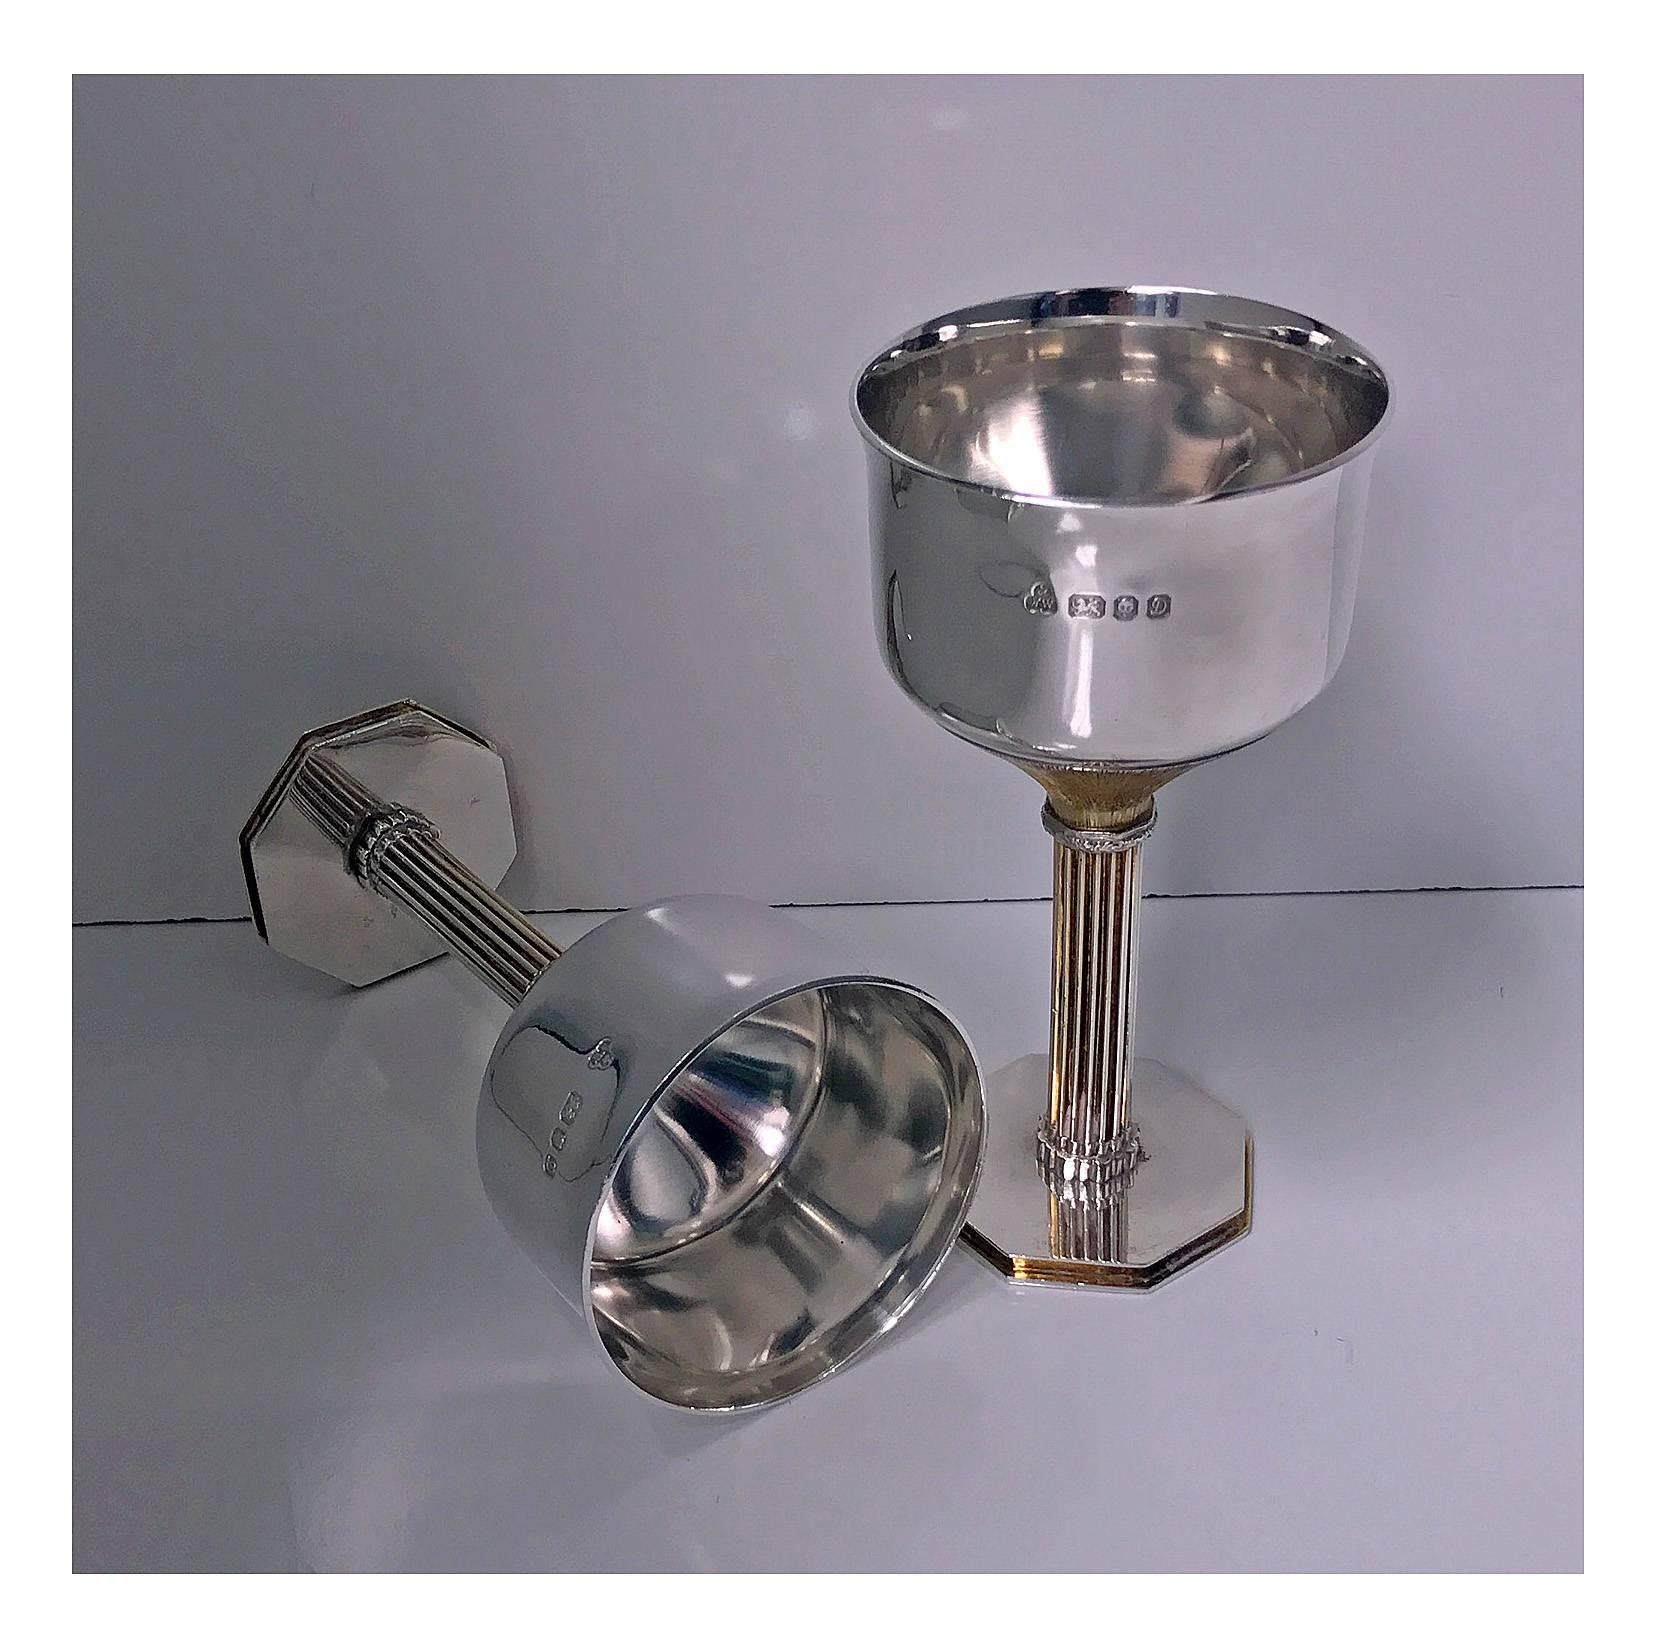 Pair of sterling silver and gilded goblets, gilded column style stems and octagonal bases, the cups of plain wasted form. London 1978, Wakely and Wheeler. Measure: Height 13.5 cm (5.25 inches), weight approximate 366.05 grams. (11.76 oz). Fully